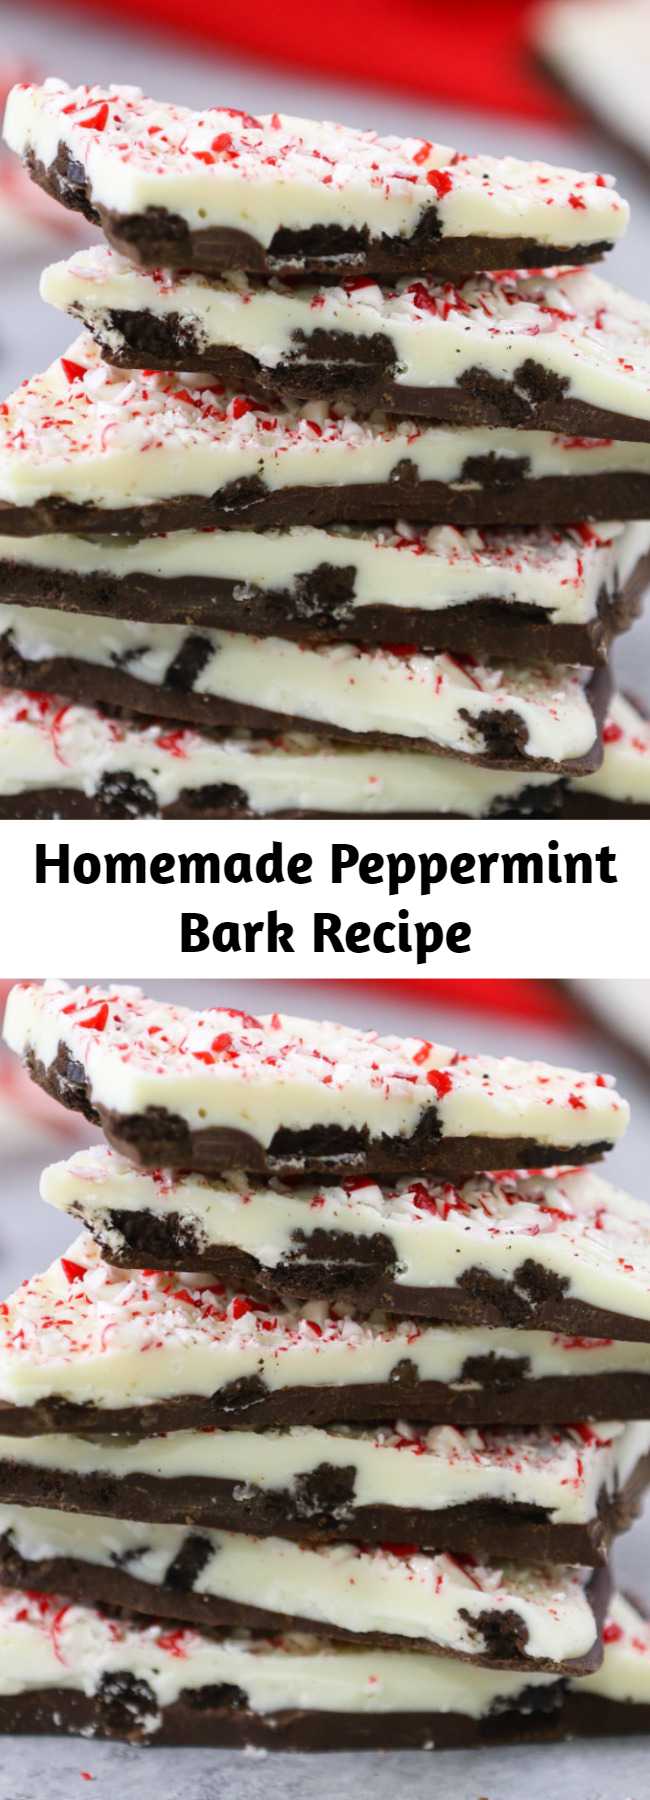 Homemade Peppermint Bark Recipe - This Peppermint Bark has irresistible layers of dark and white chocolate flavored with peppermint and topped with crushed candy cane! This delectable Christmas treat is very festive and ideal for gift-giving. We show you how to prevent the layers from separating and easily break it apart for the perfect presentation!